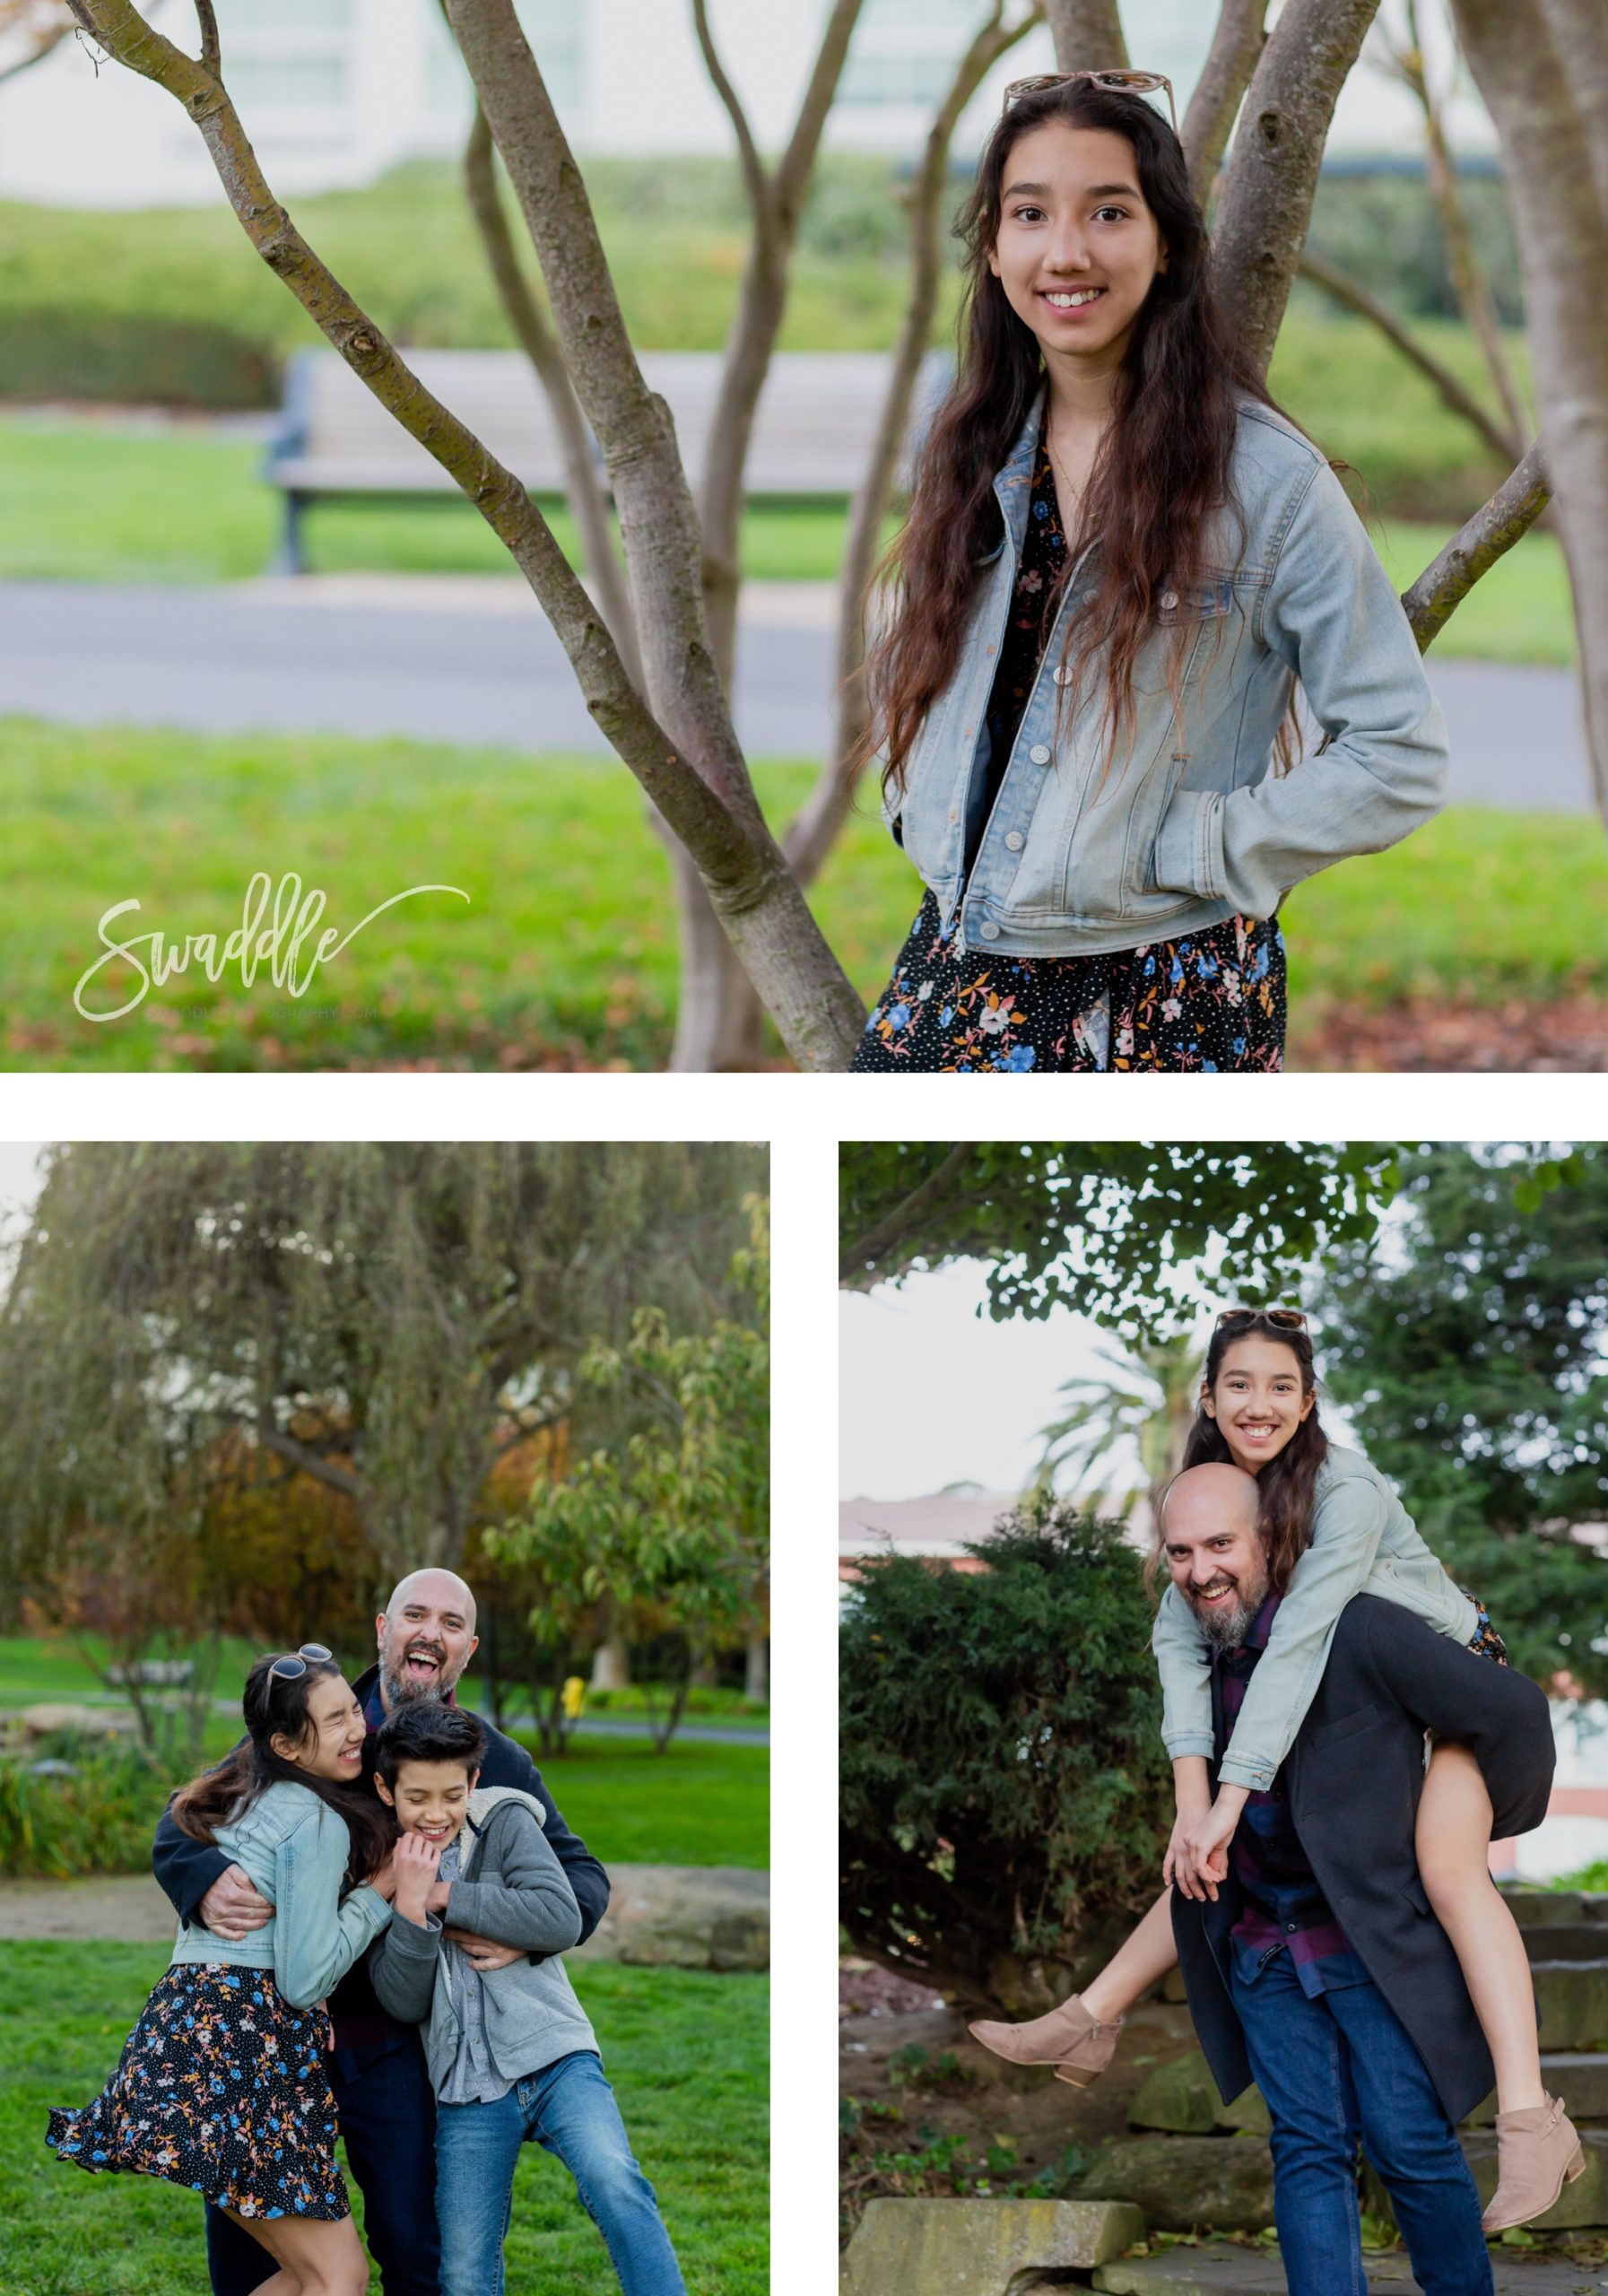 three photos in the San Francisco Presidio - first a teen girl wearing a blue jean jacket leaning on a tree, second a dad surprise tickling his older kids, third a teen girl piggyback on her dad